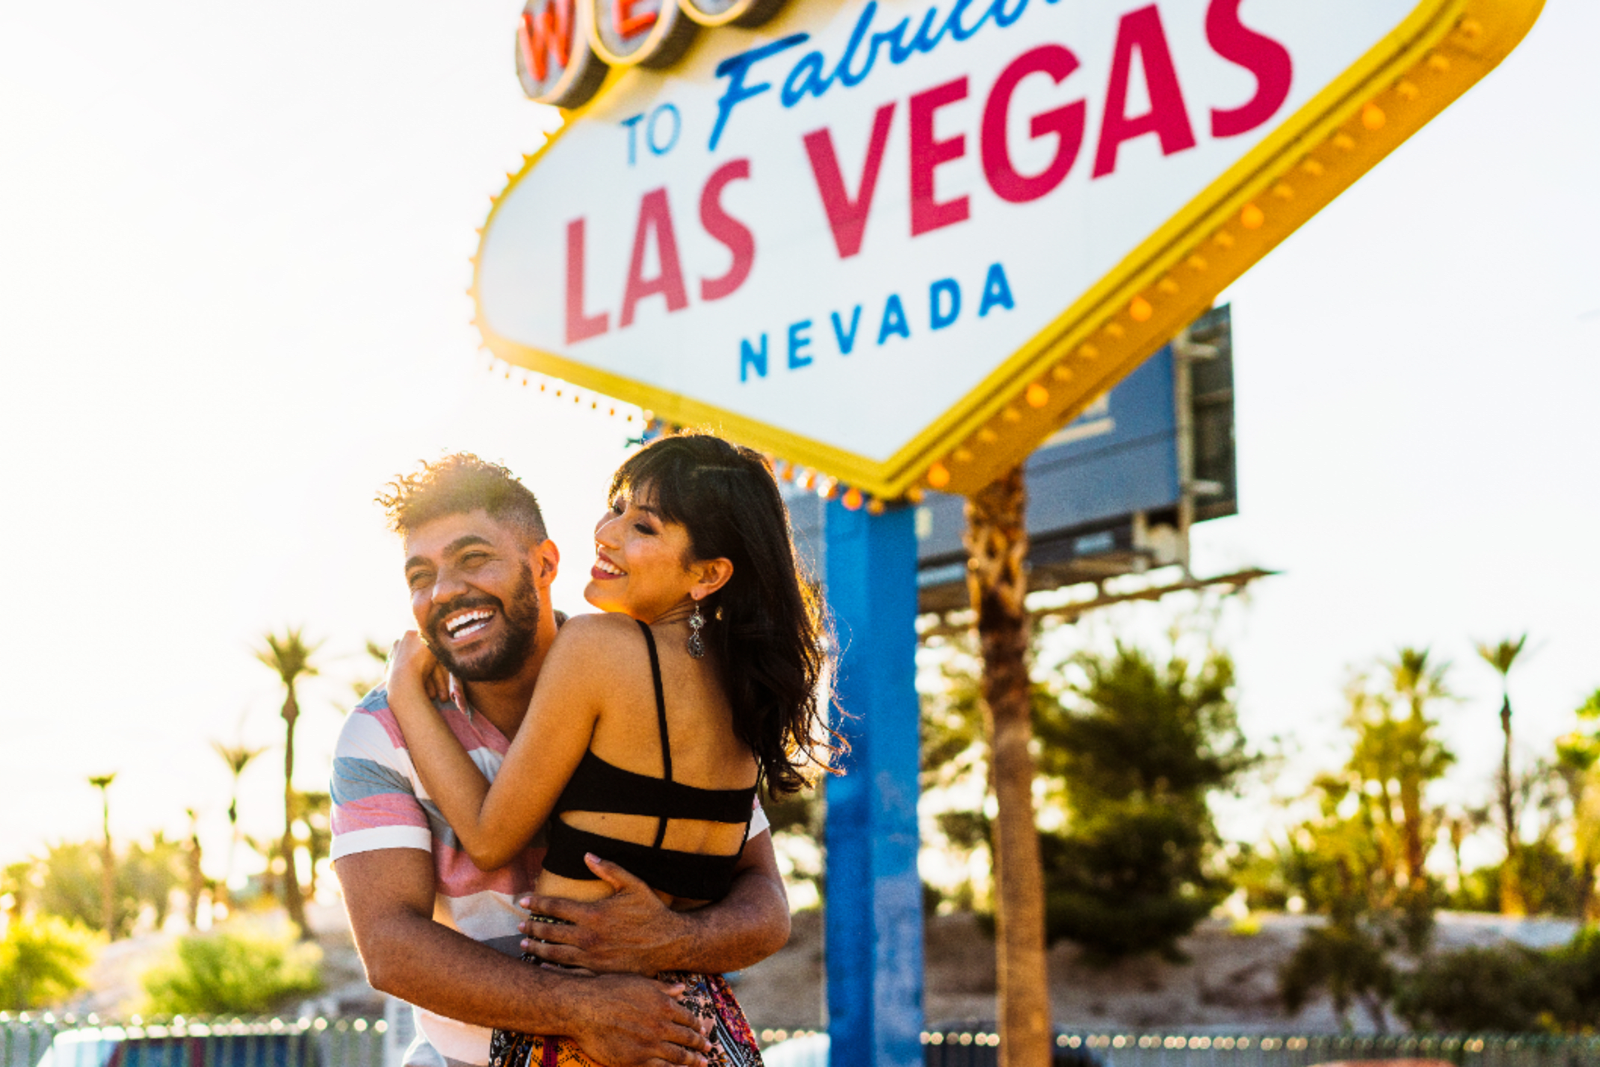 Las Vegas is one of the best spring break destinations for families